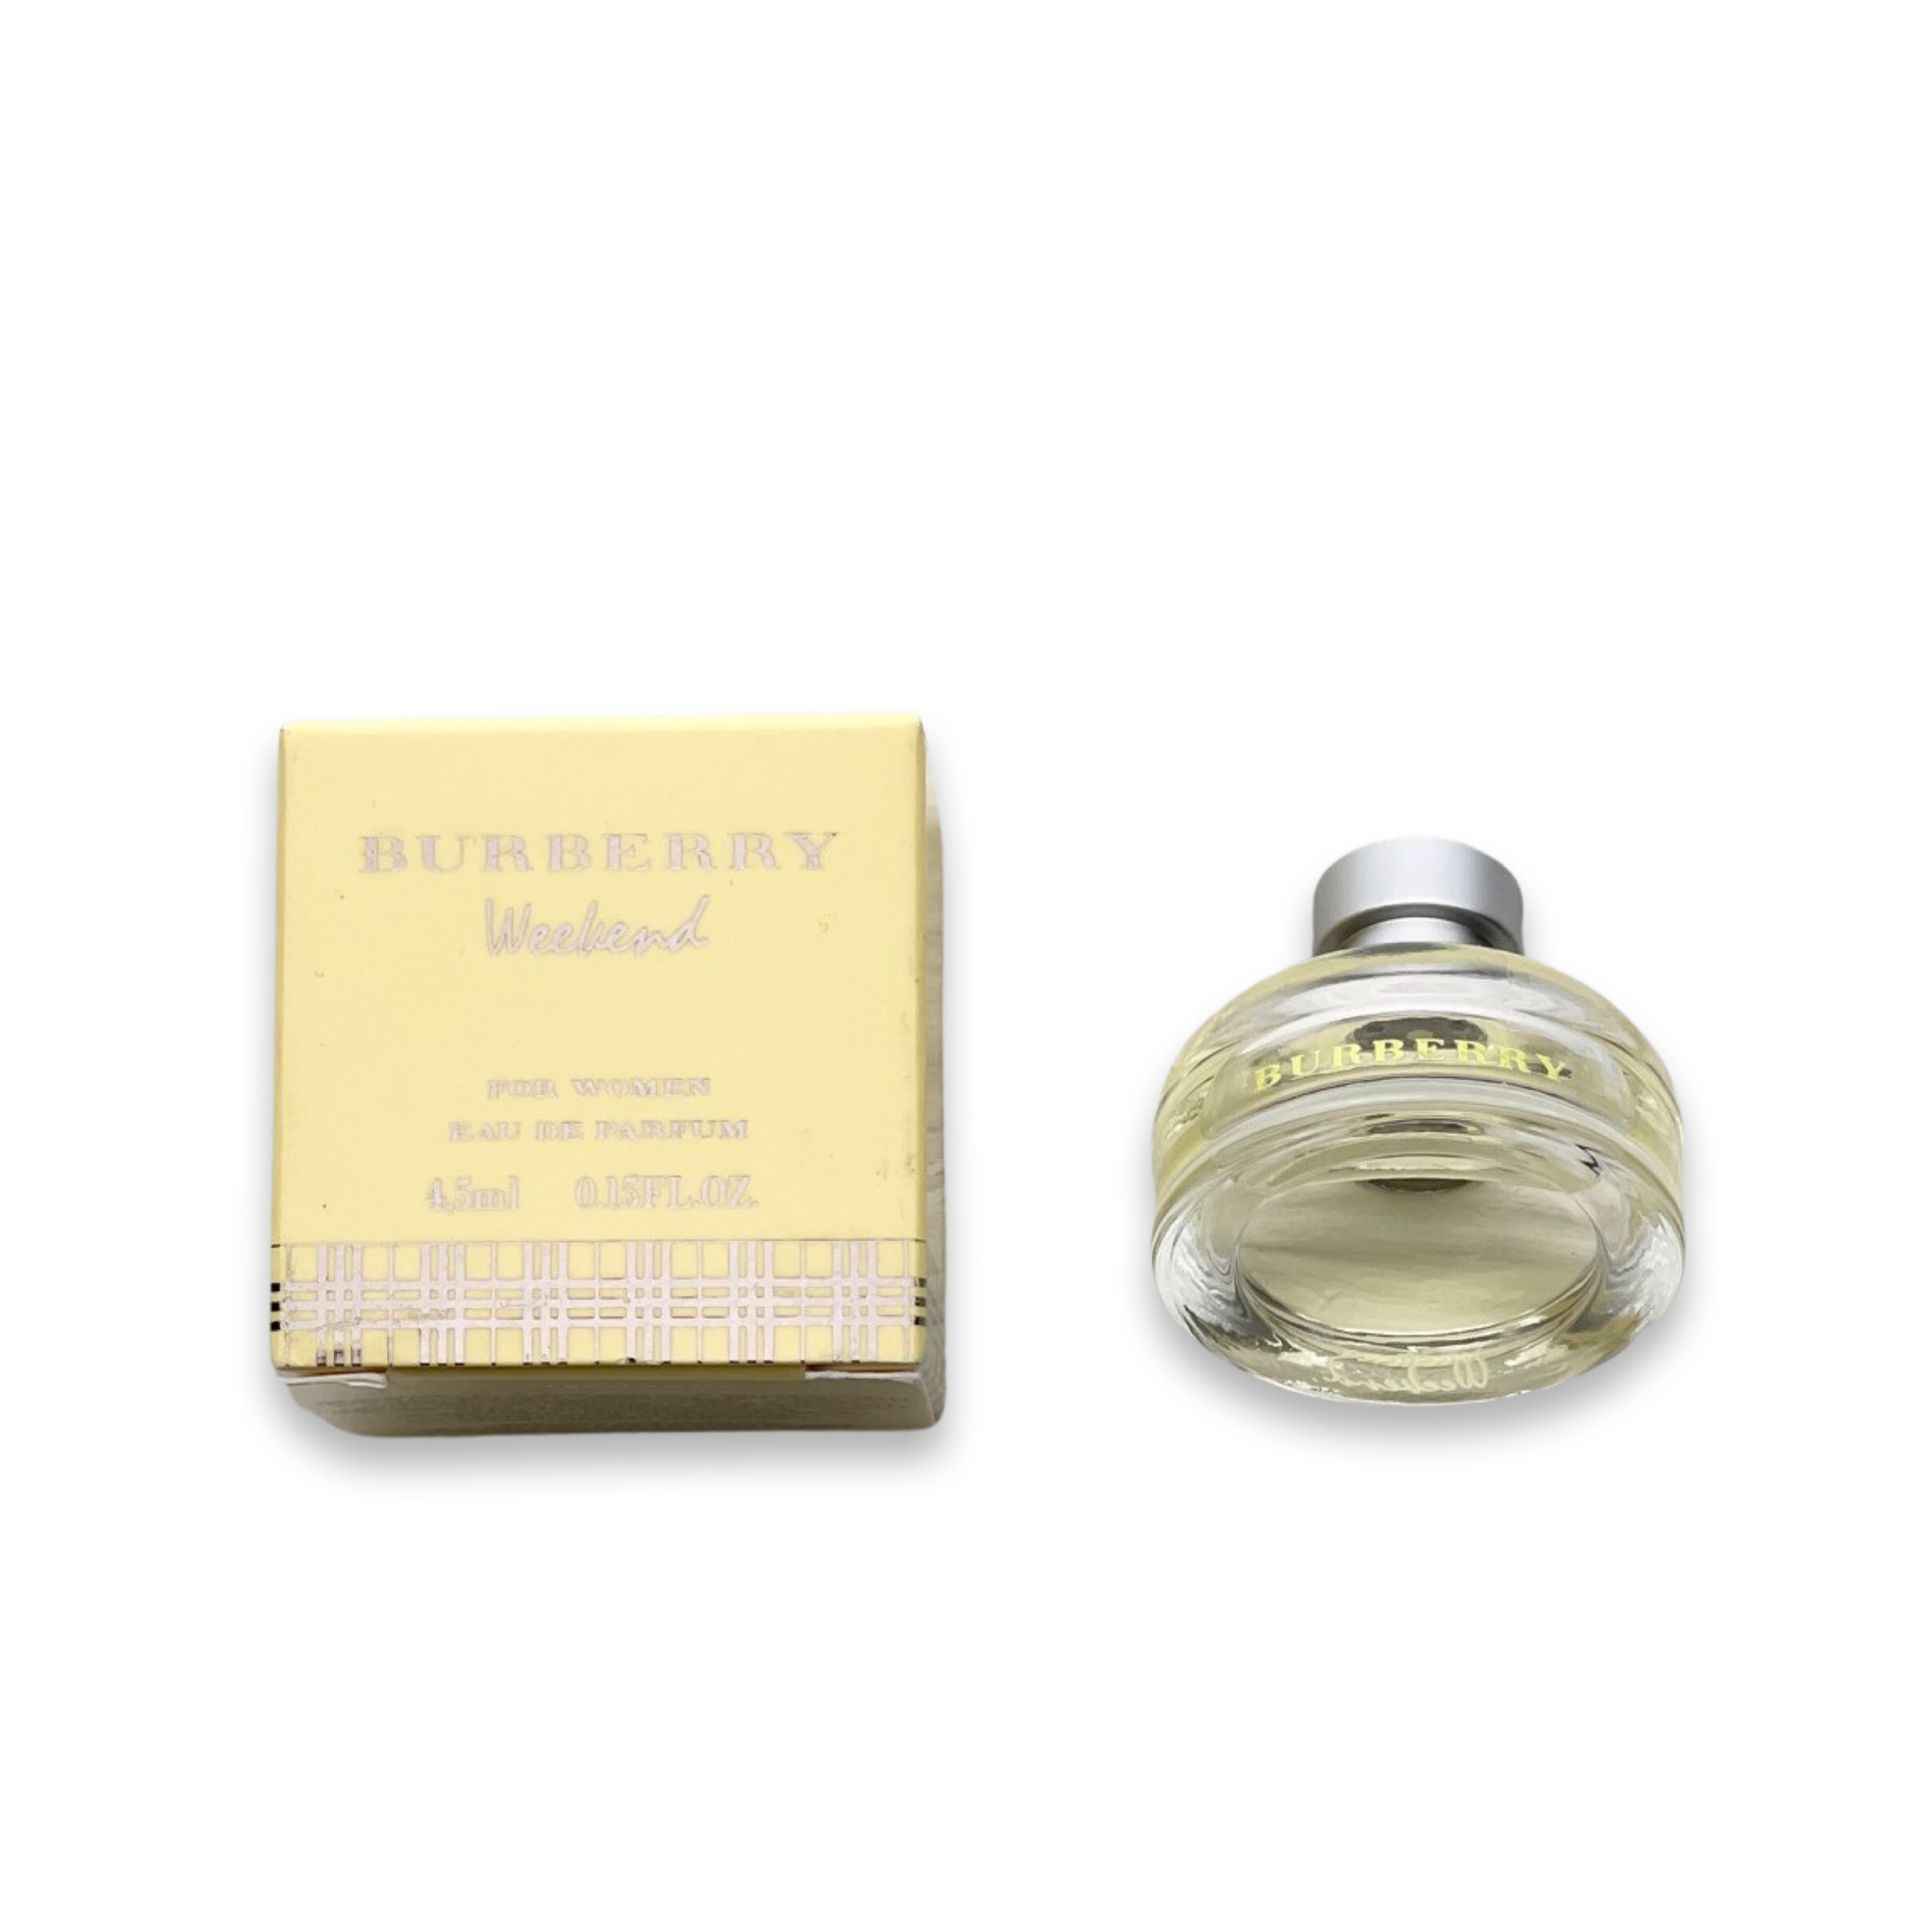 Burberry Weekend EDP / Travel Size (4.5ml)